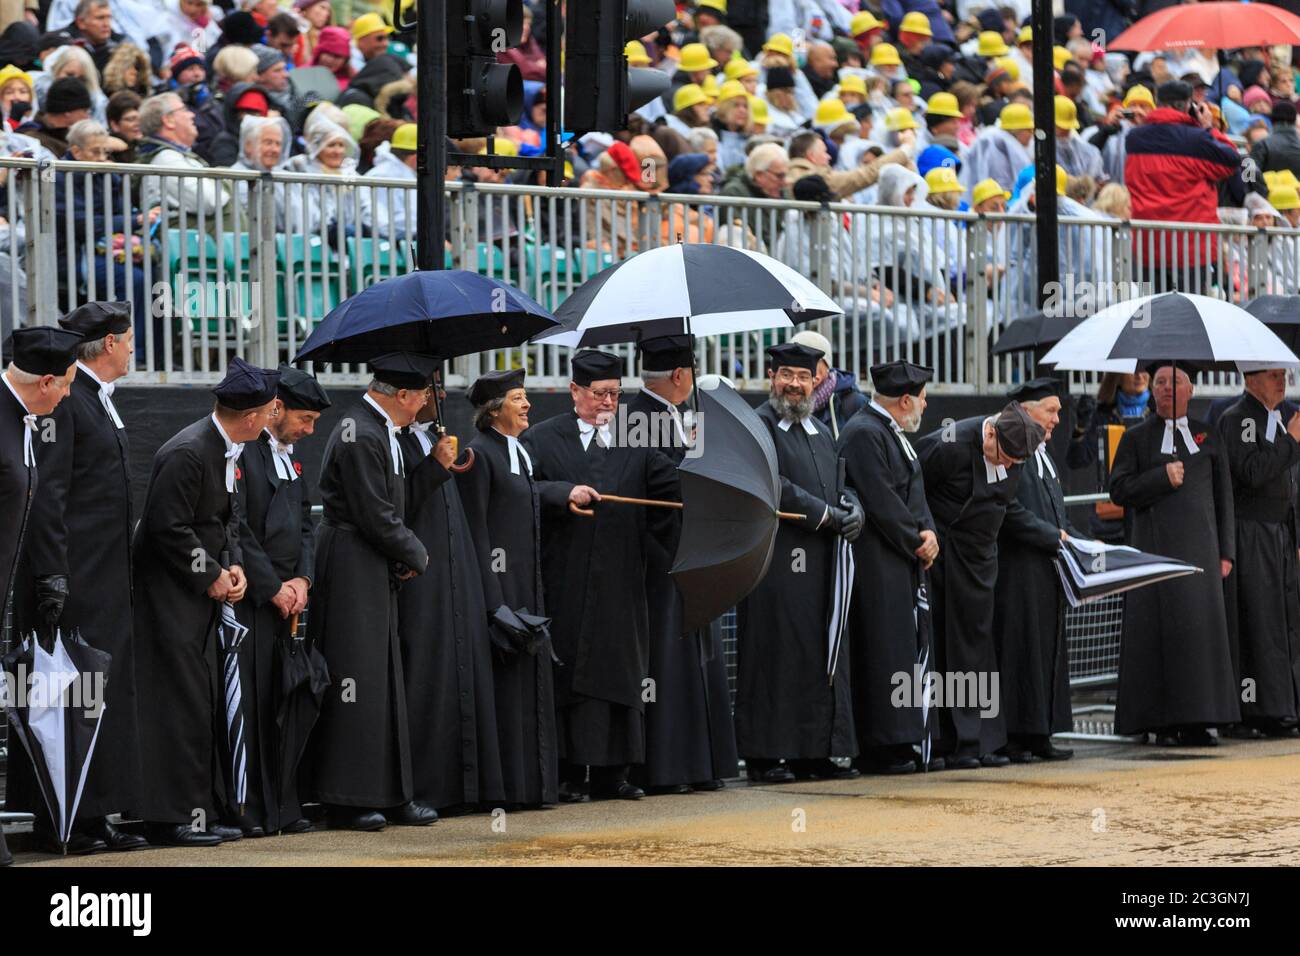 Clergy with umbrellas are lined up awaiting the parade at Lord Mayor's Show 2016 in the City of London, England, UK Stock Photo